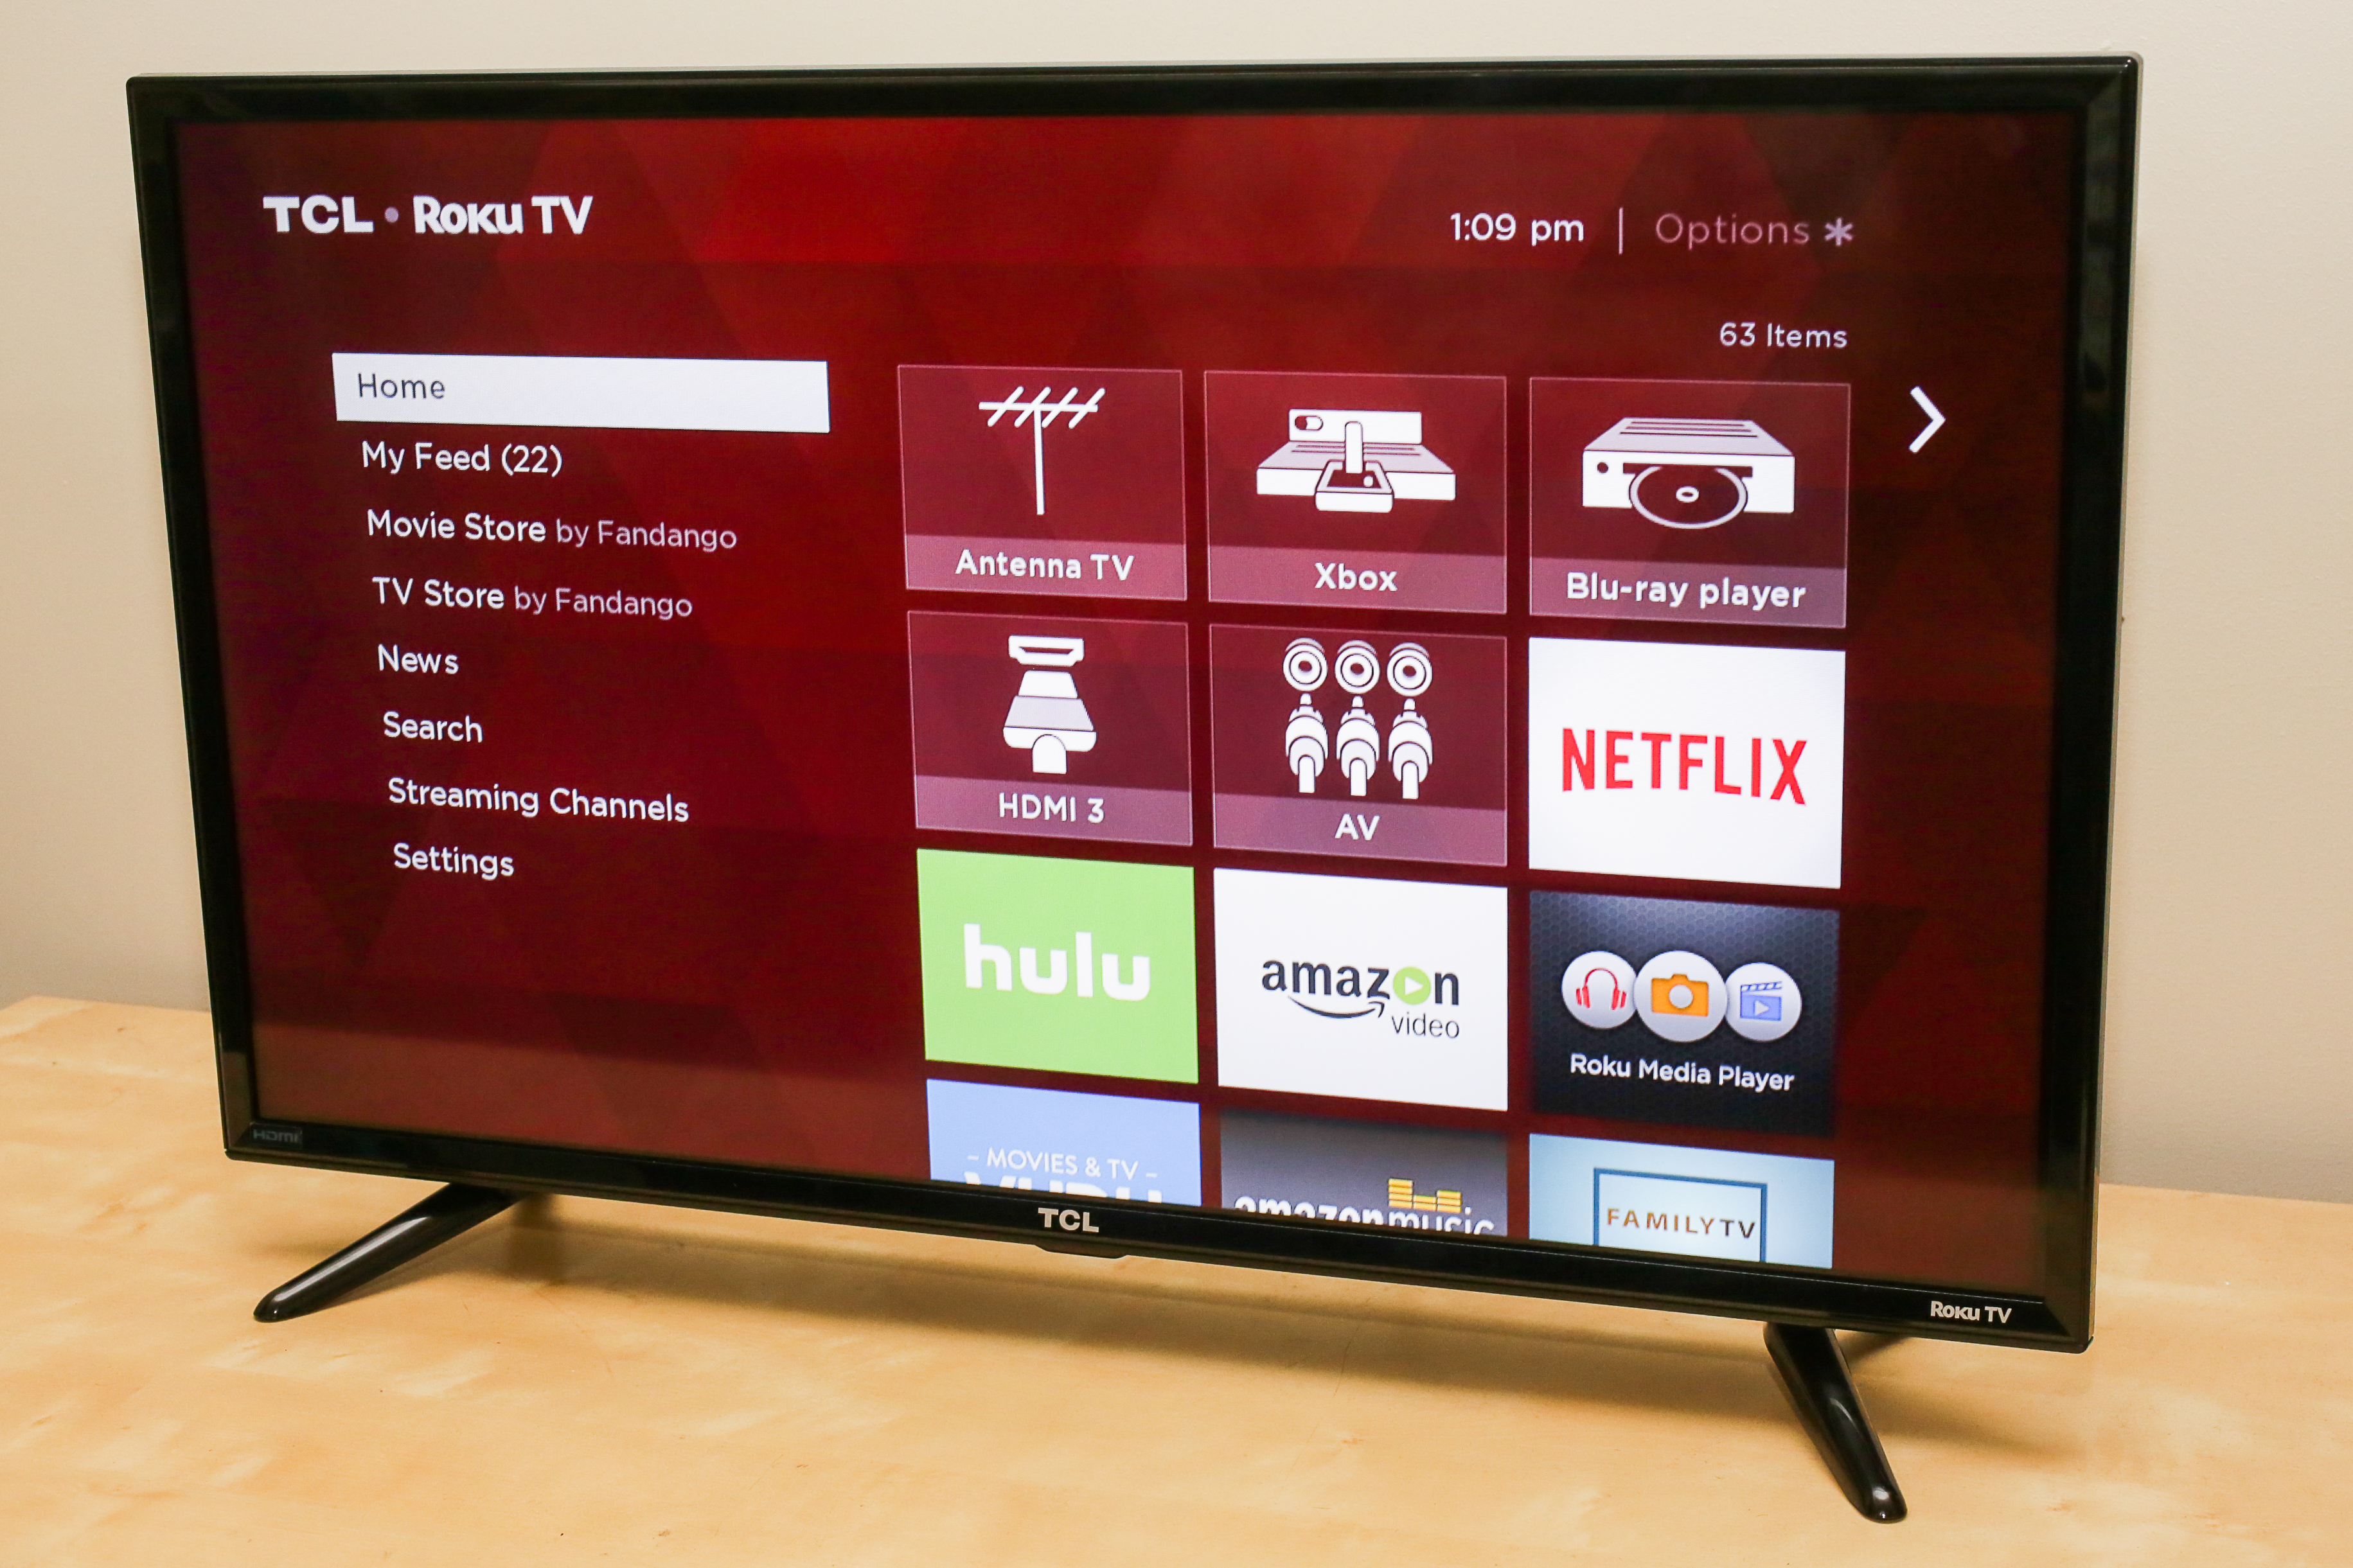 TCL S3750/FP110 series (Roku TV) review: Our favorite cheap smart TVs are  from Roku, starting at an insane $125 - CNET